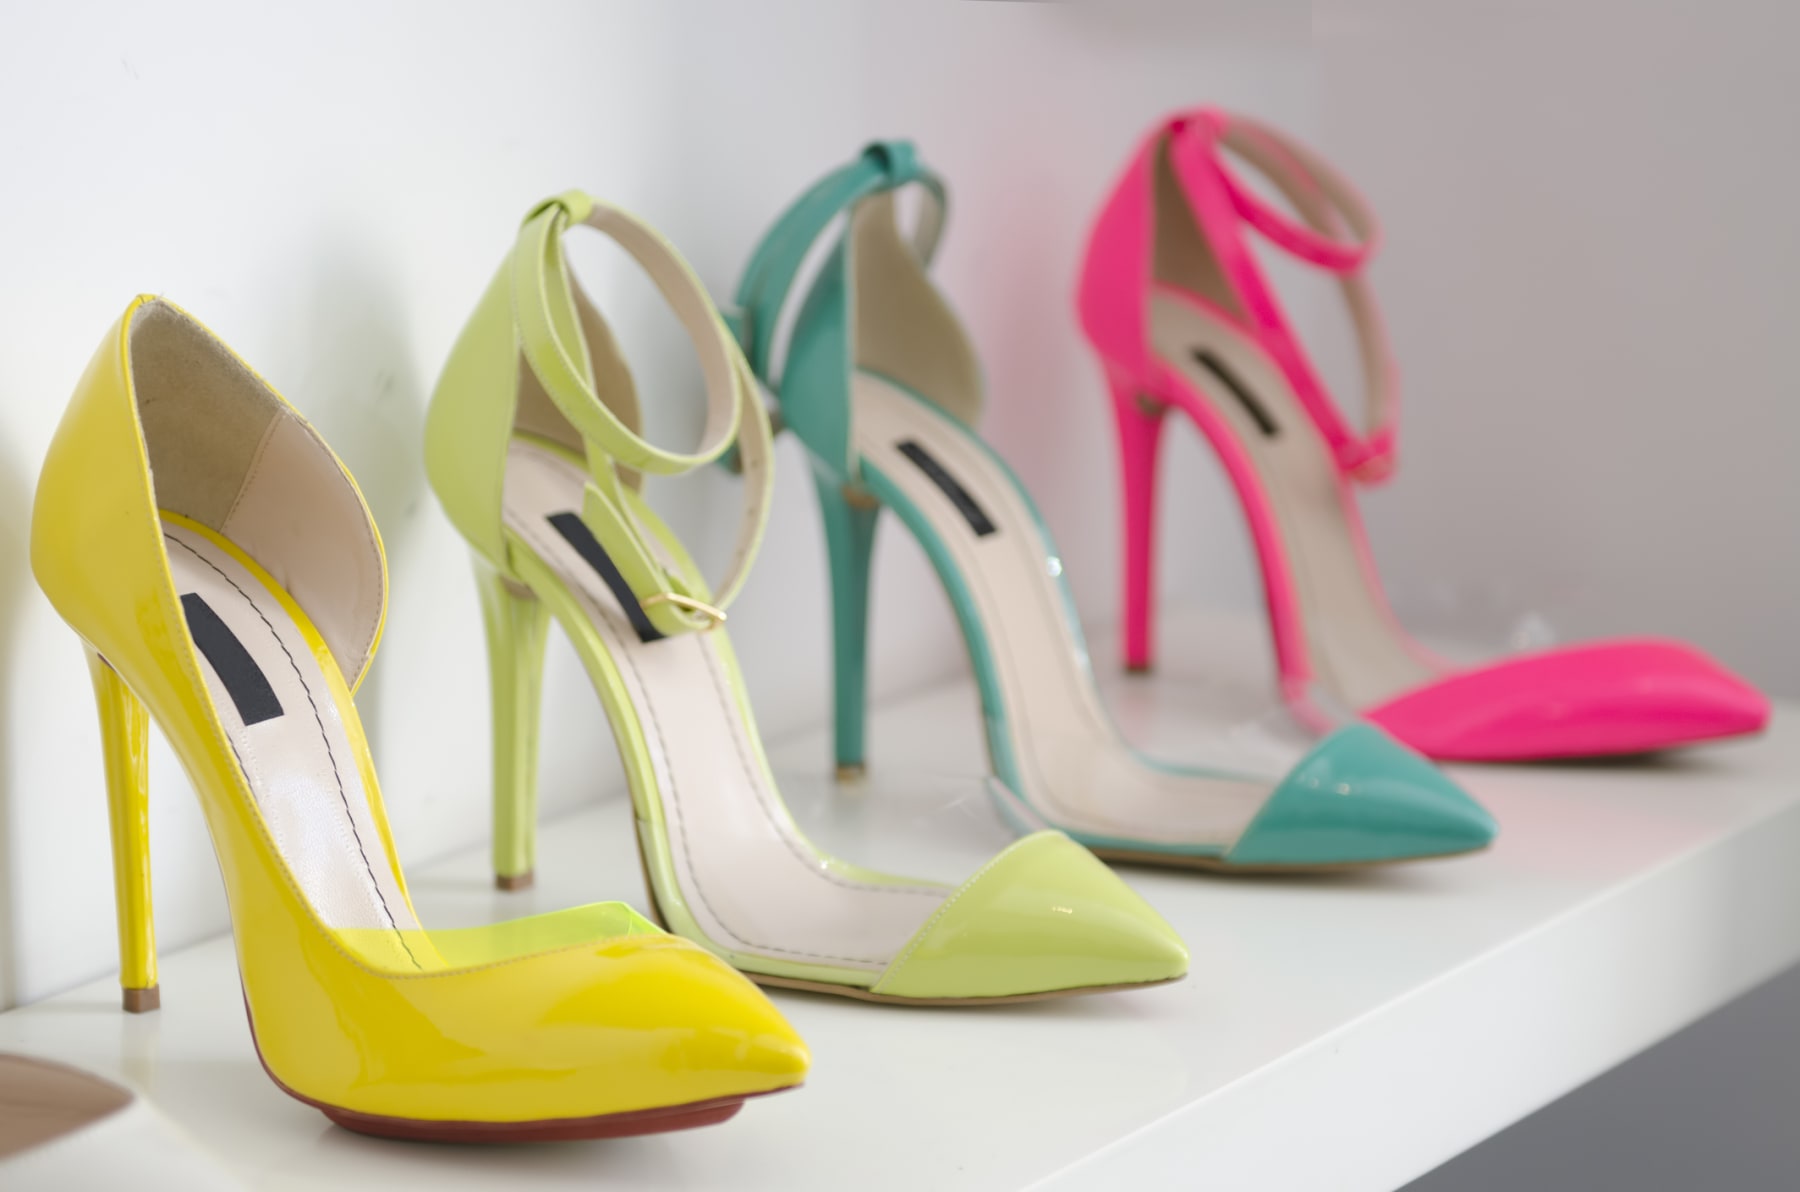 Four high-heeled women's shoes are displayed in a row.